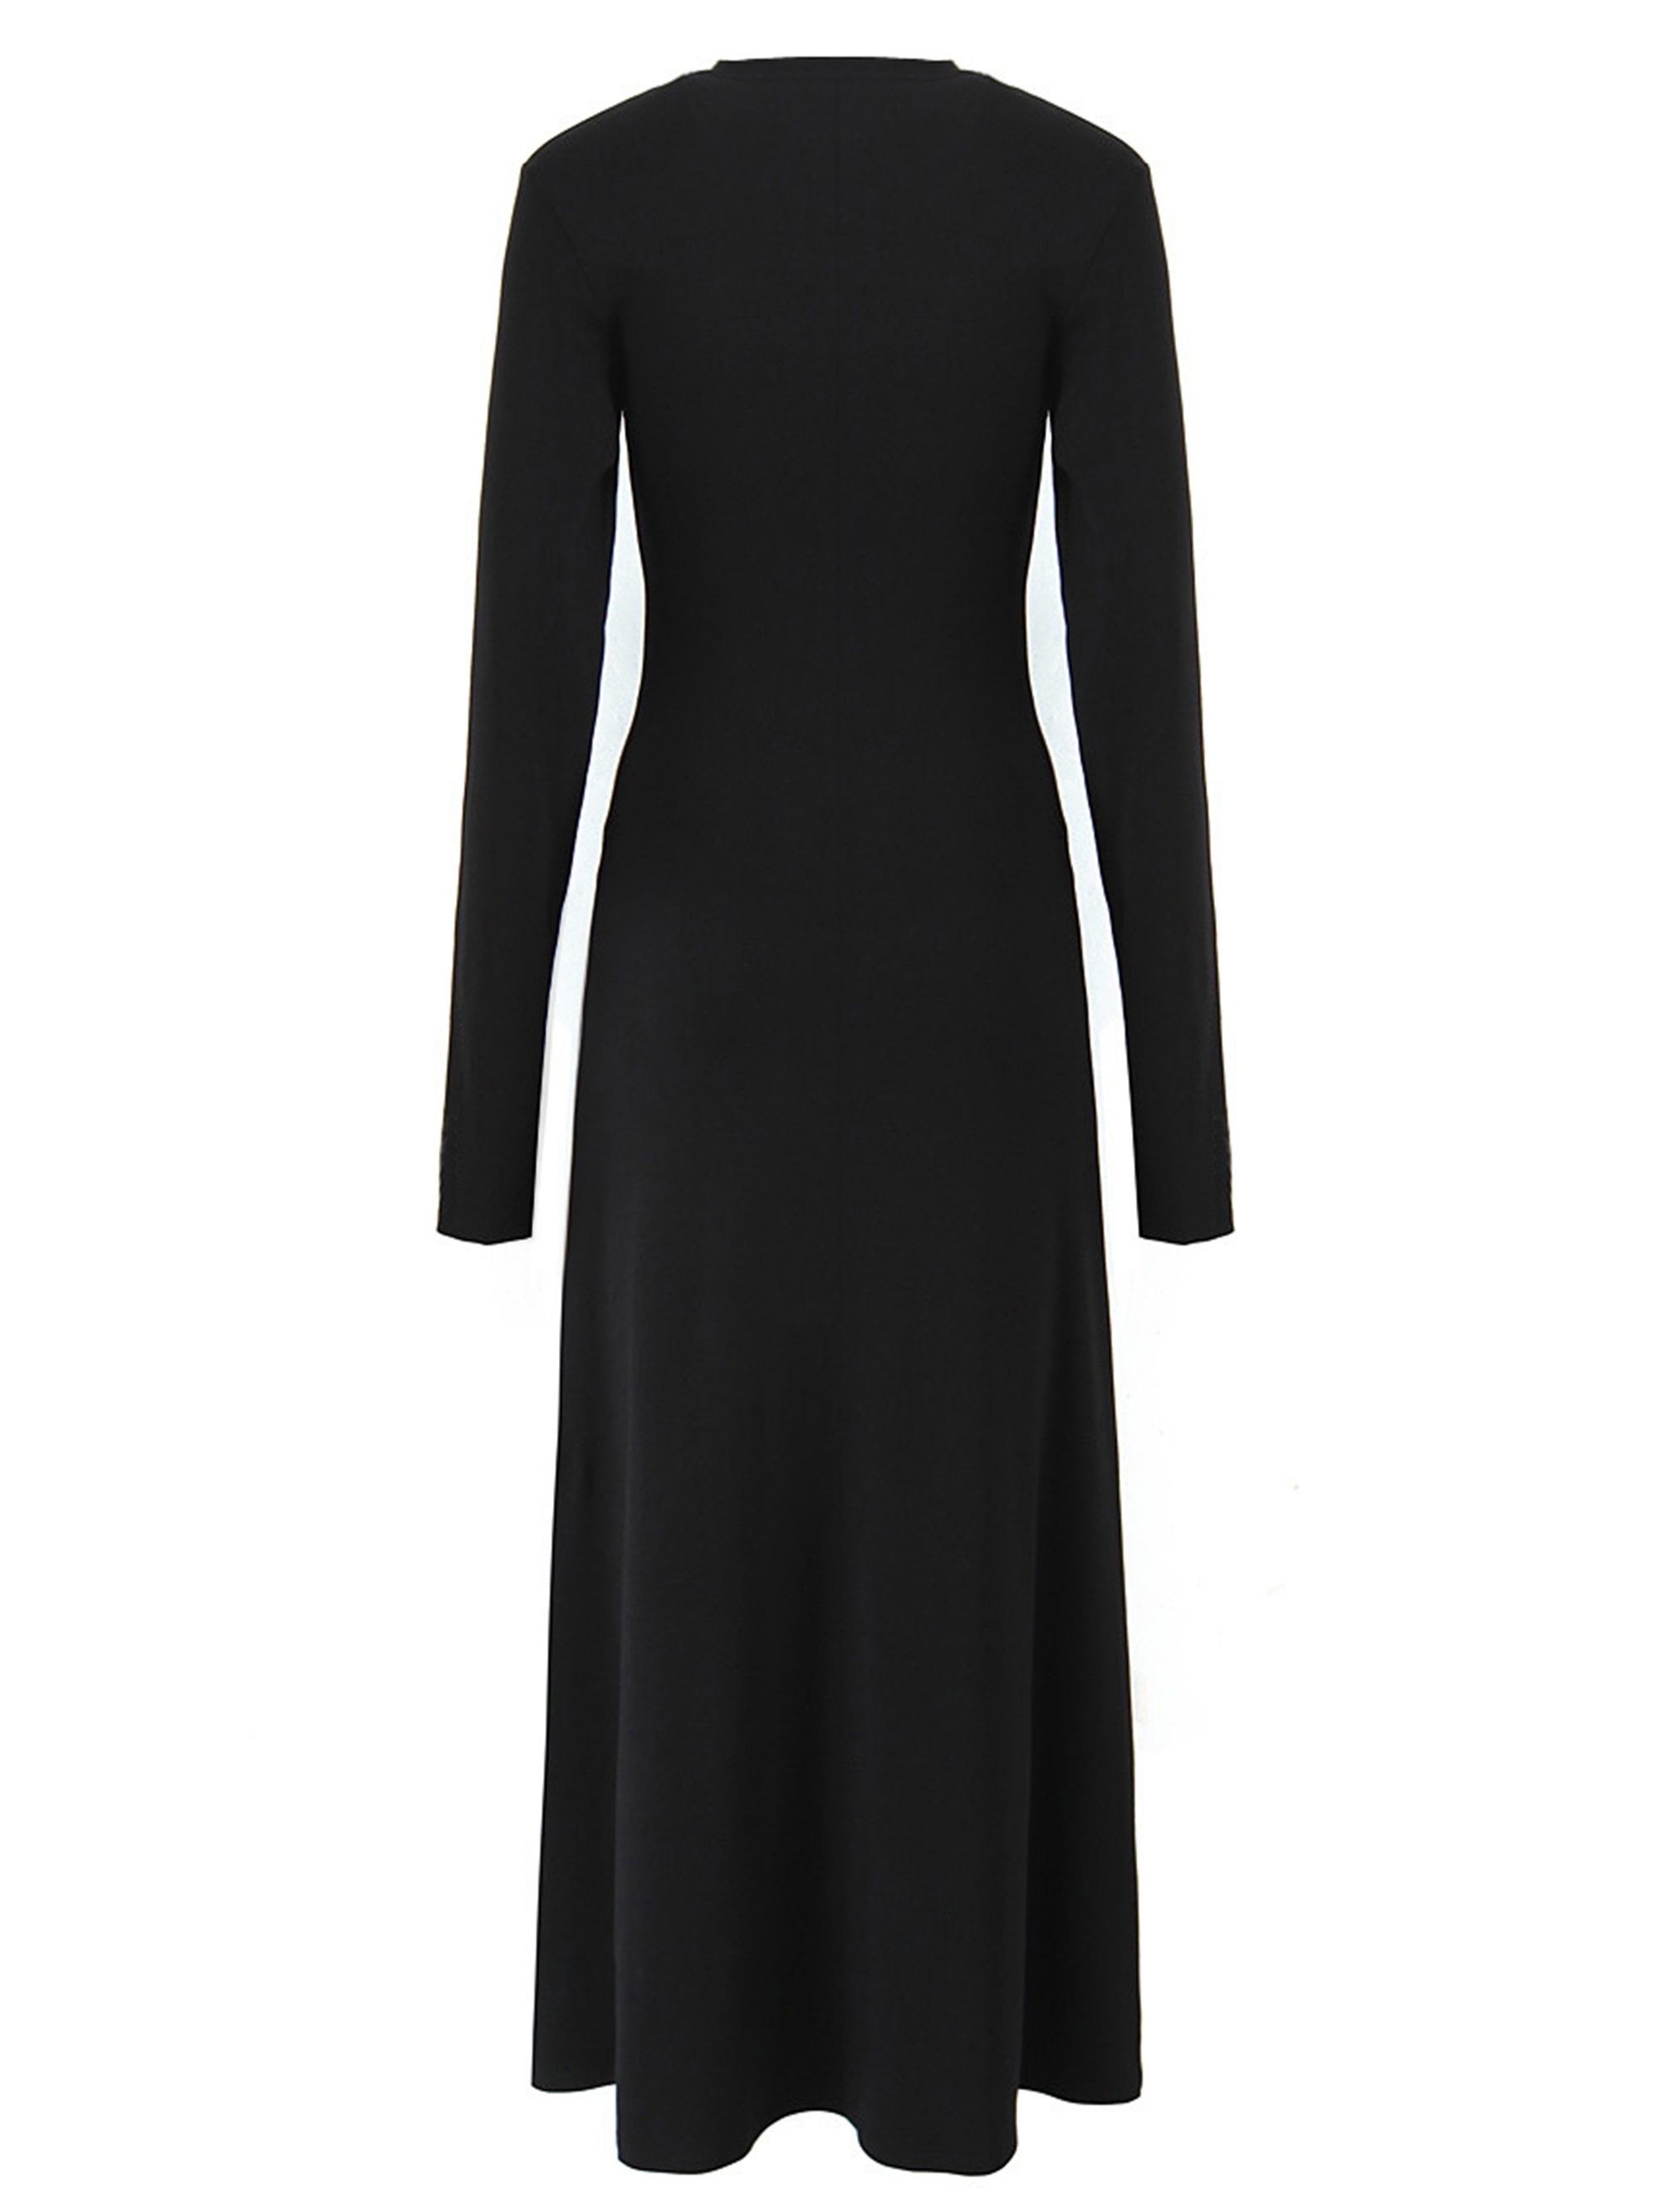 solid color long sleeve dress casual crew neck maxi length dress for spring fall womens clothing